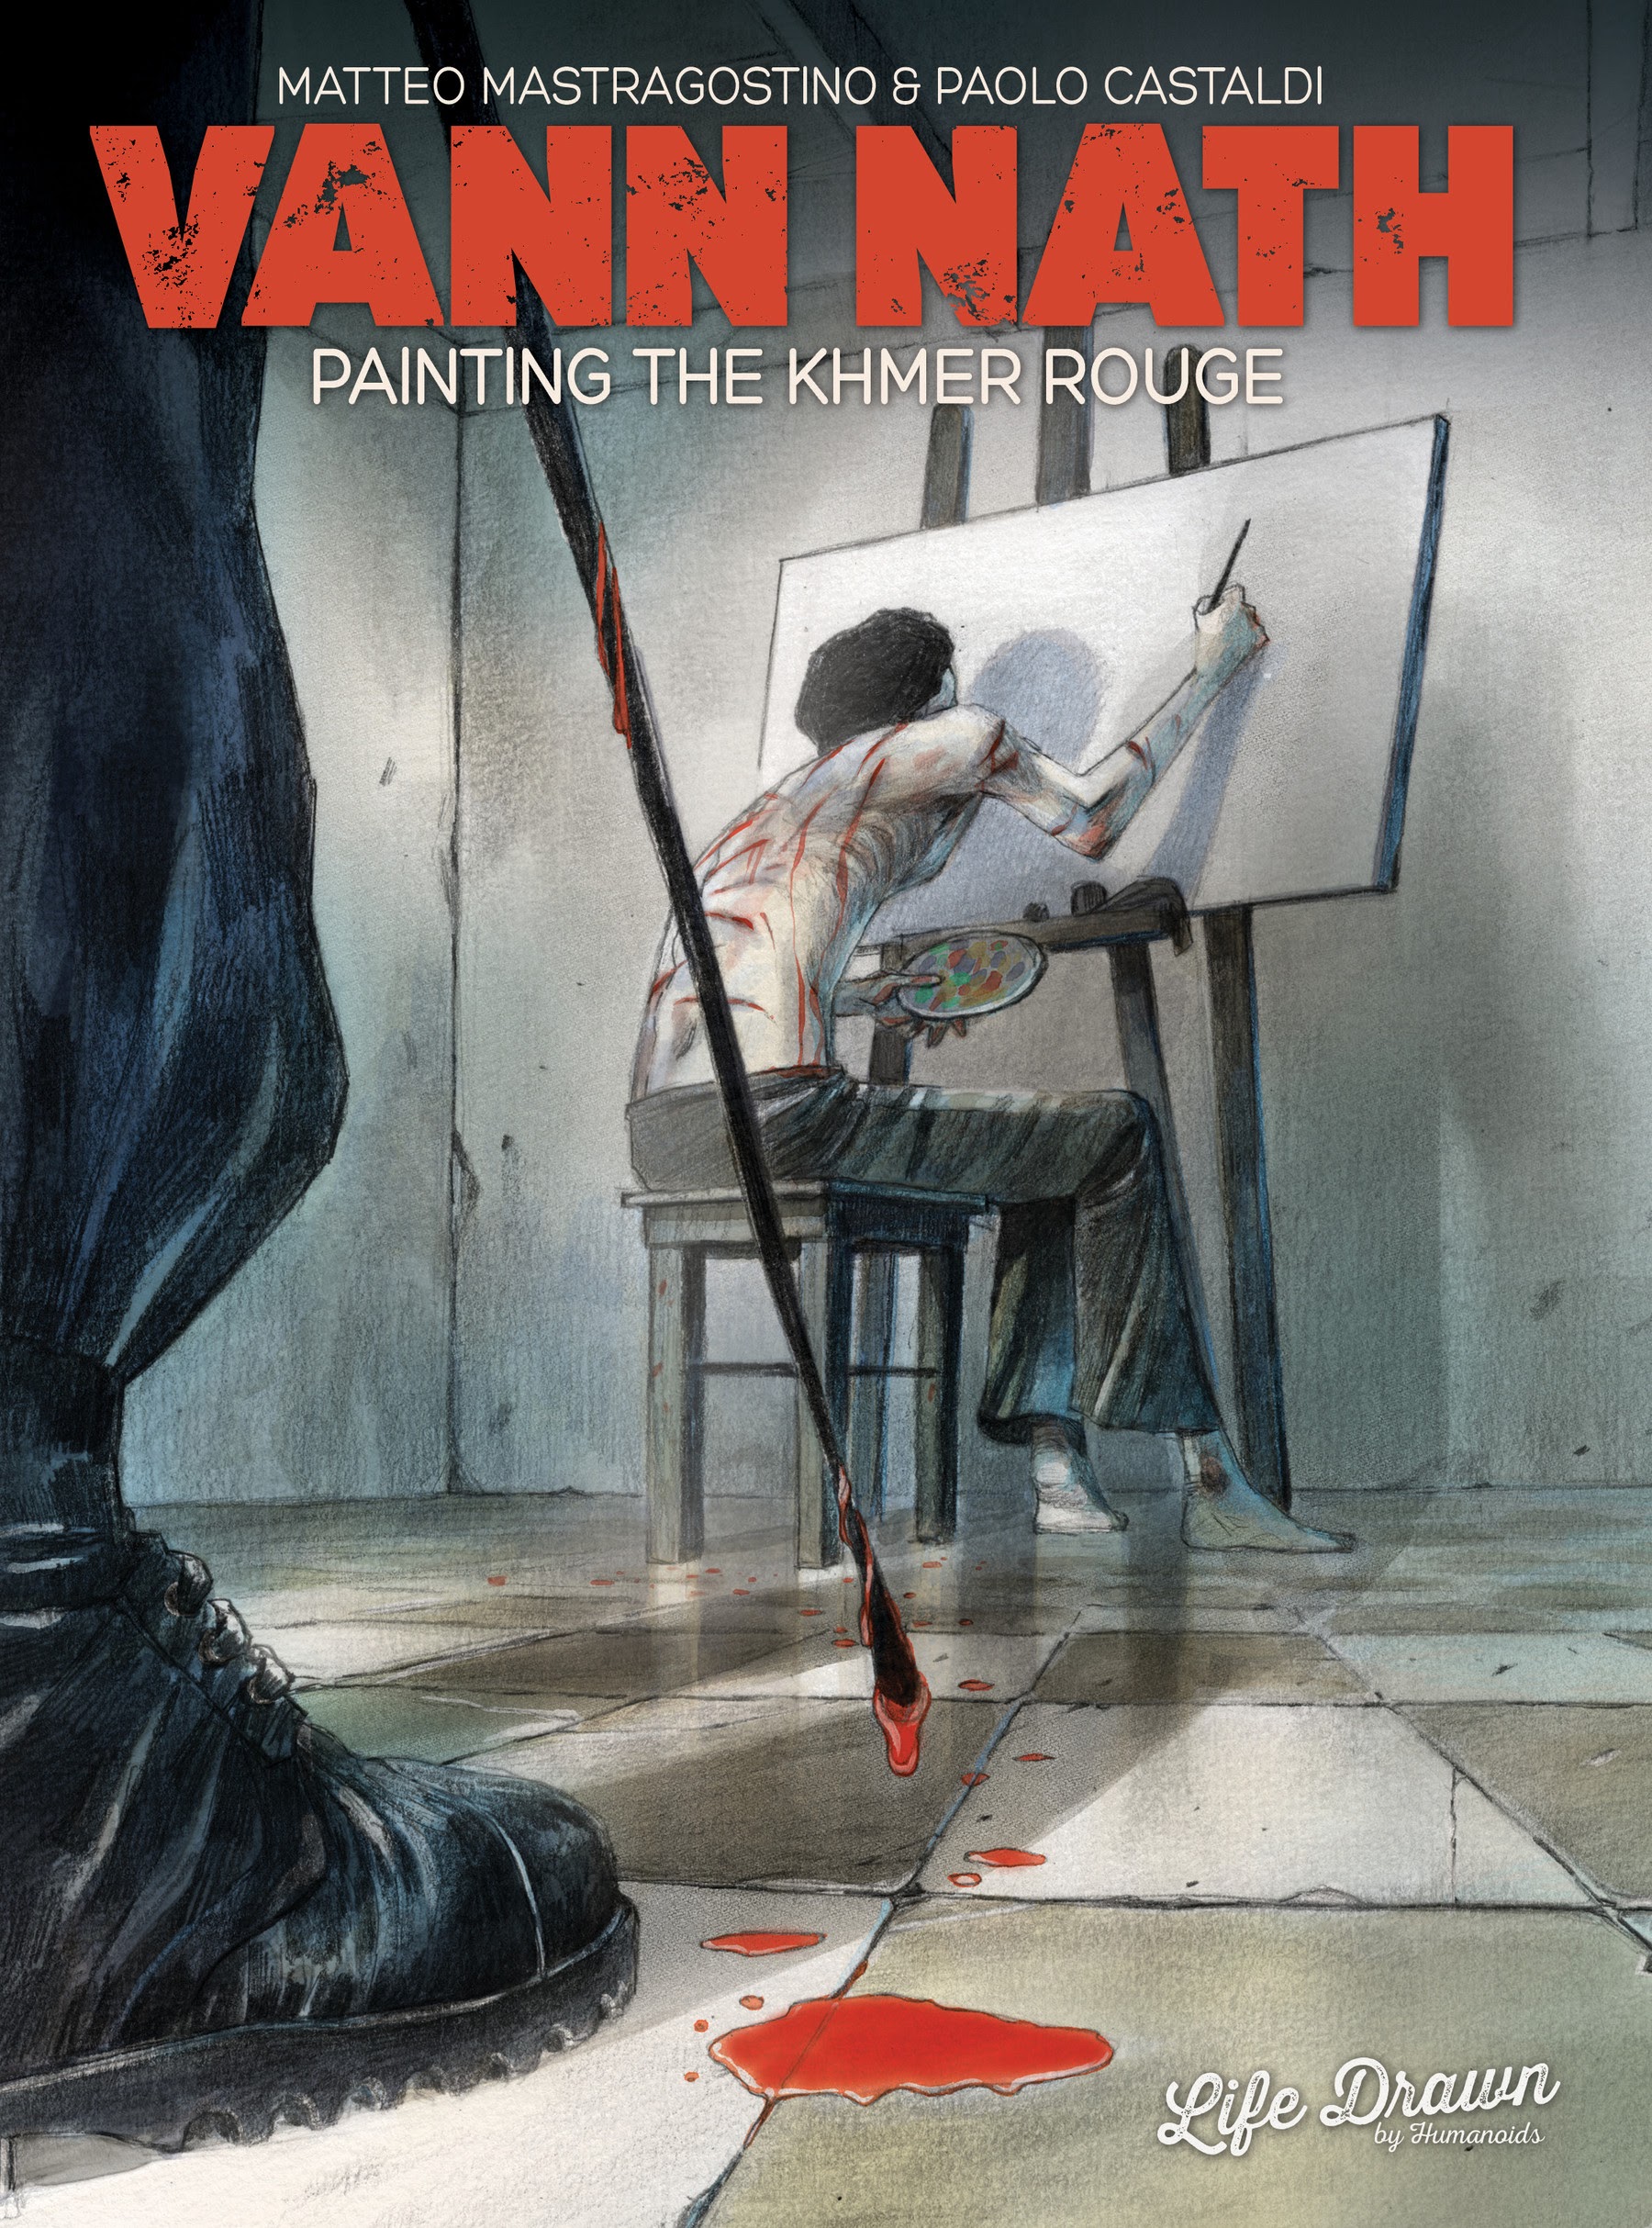 Read online Vann Nath: Painting the Khmer Rouge comic -  Issue # TPB - 1